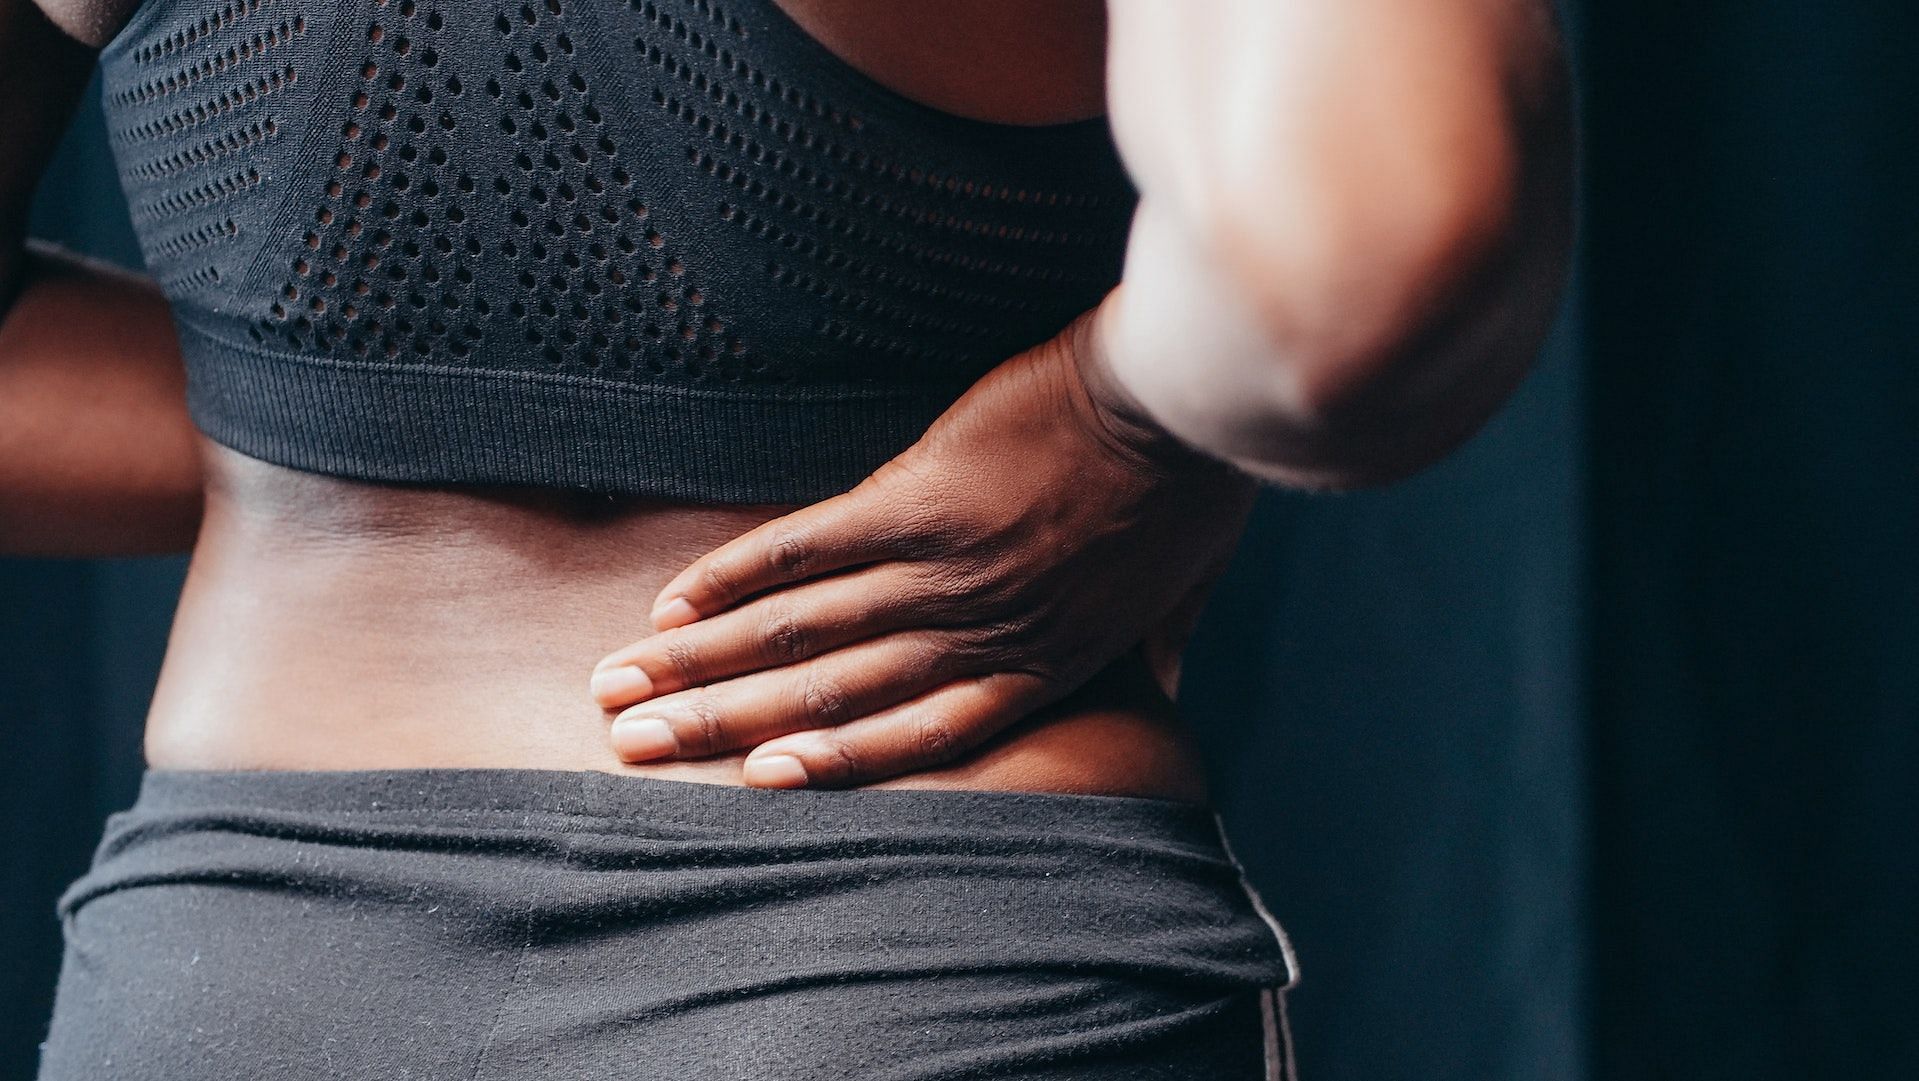 Hip pain can extend to lower back muscles. (Photo via Pexels/Kindel Media)